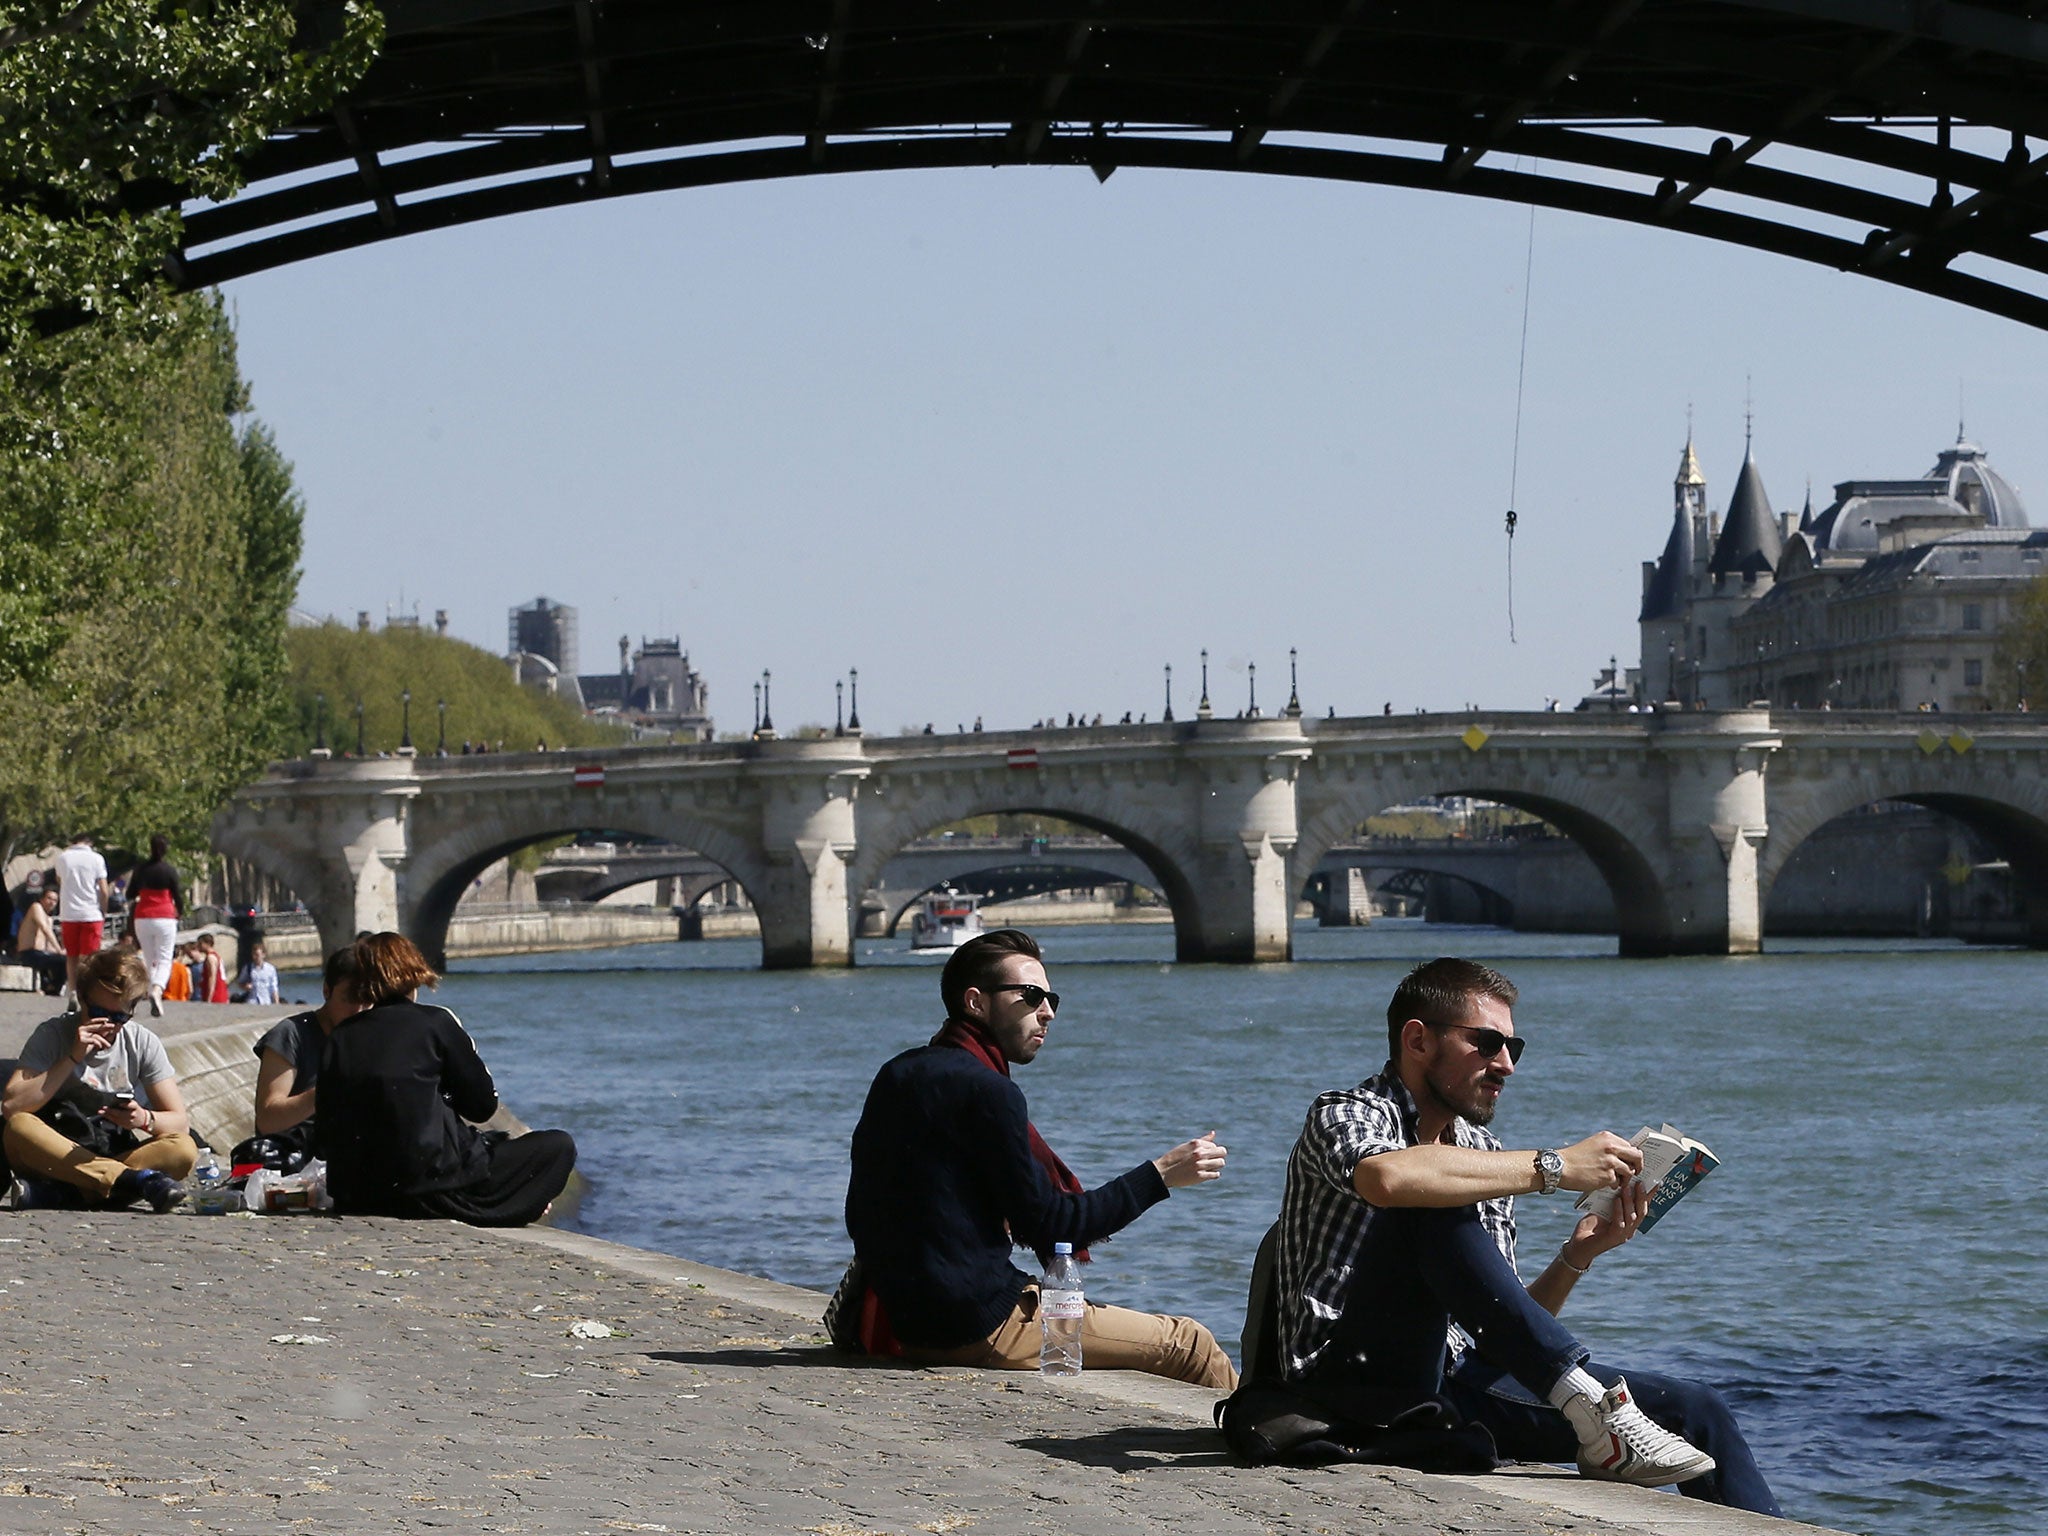 Staying Seine: French people actually work more hours per year than Germans – but fewer than Britons